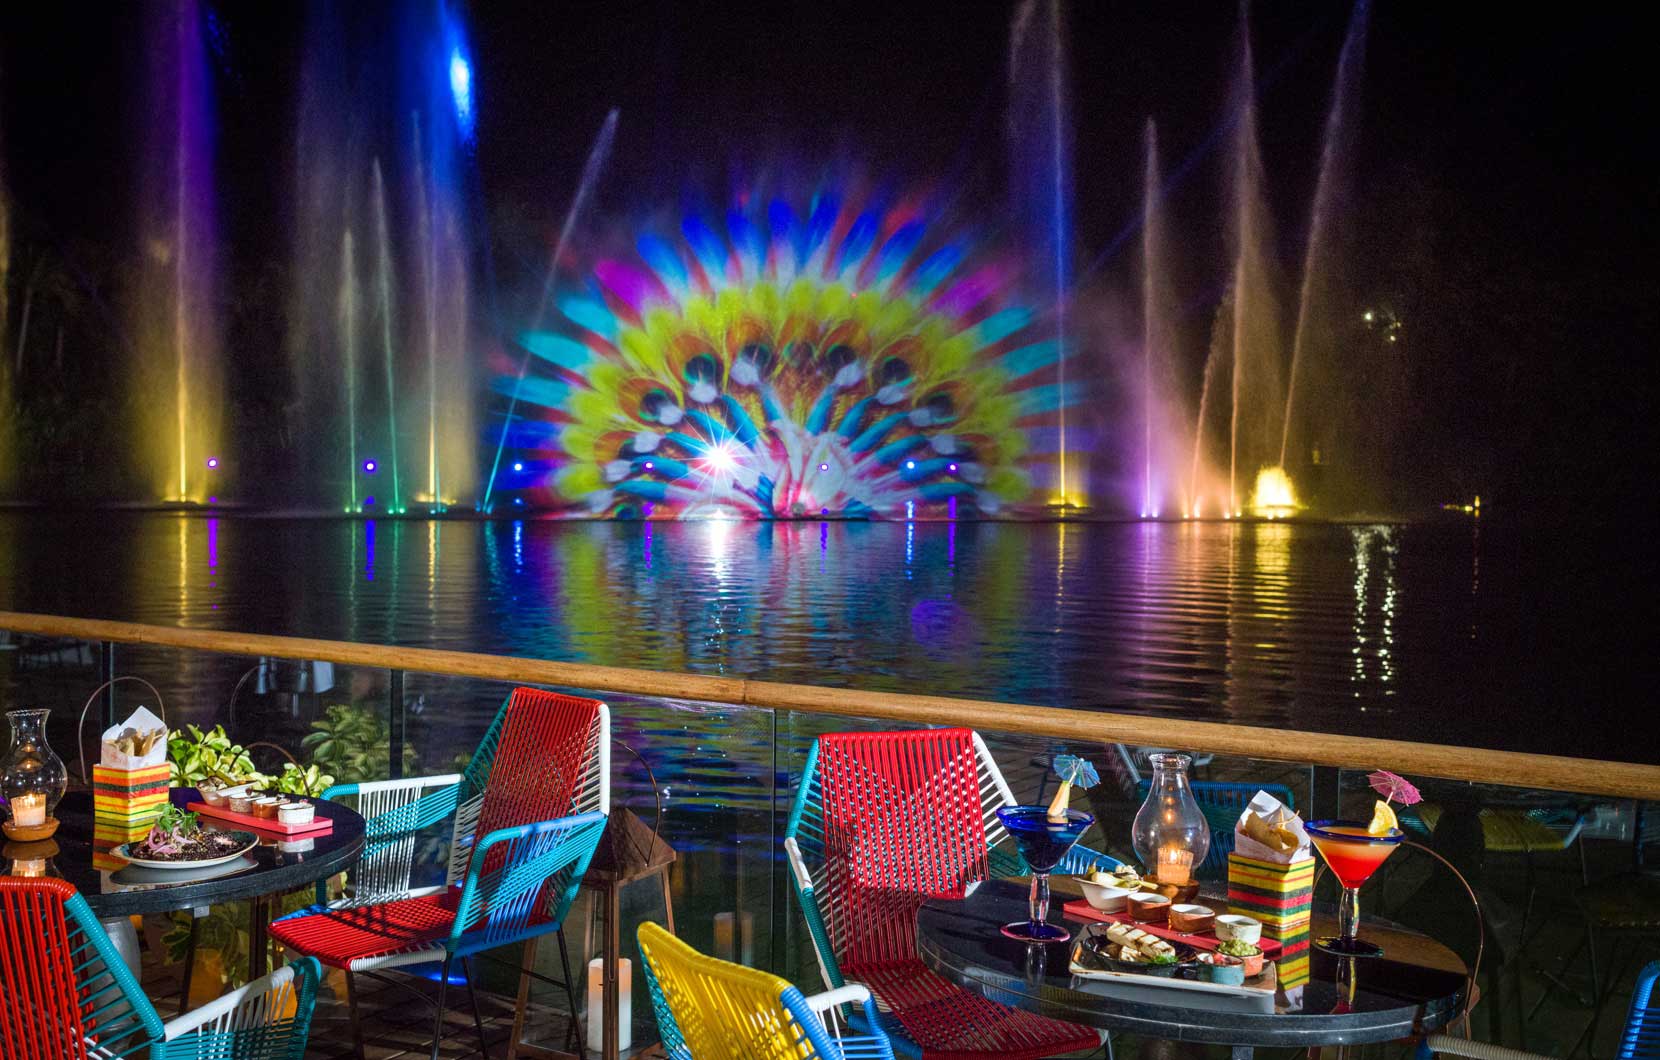 Take in the spectacular show of water, music, and light designed to mesmerize all guests at Vidanta Nuevo Vallarta.